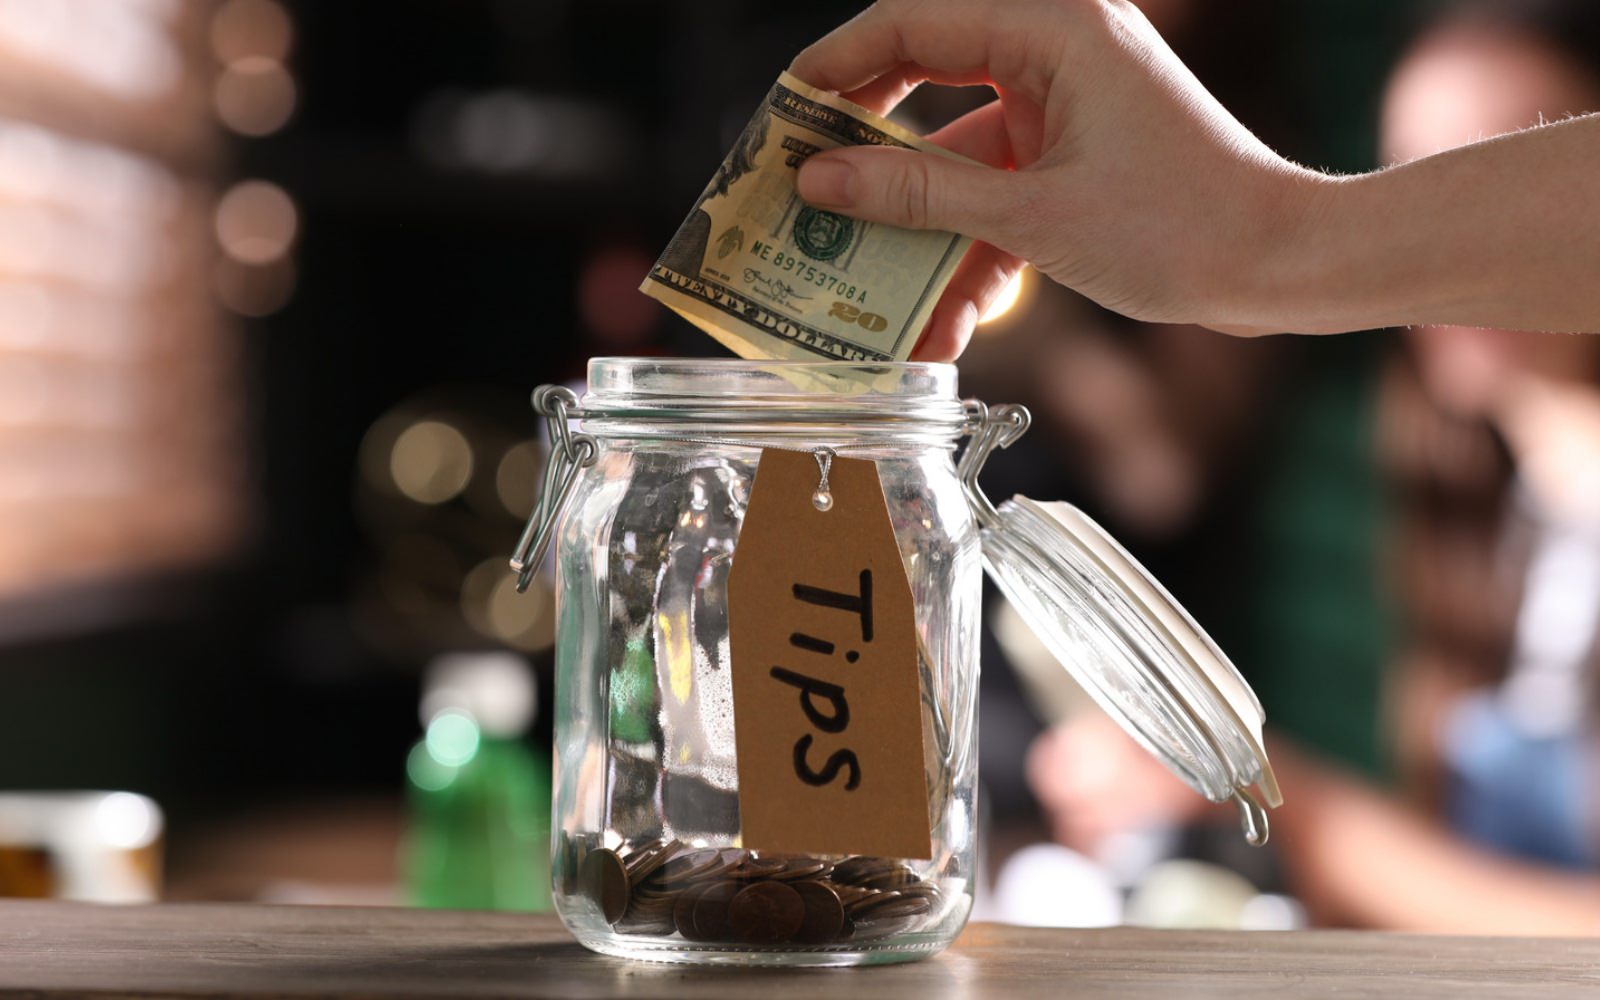 A person putting money into a tip jar